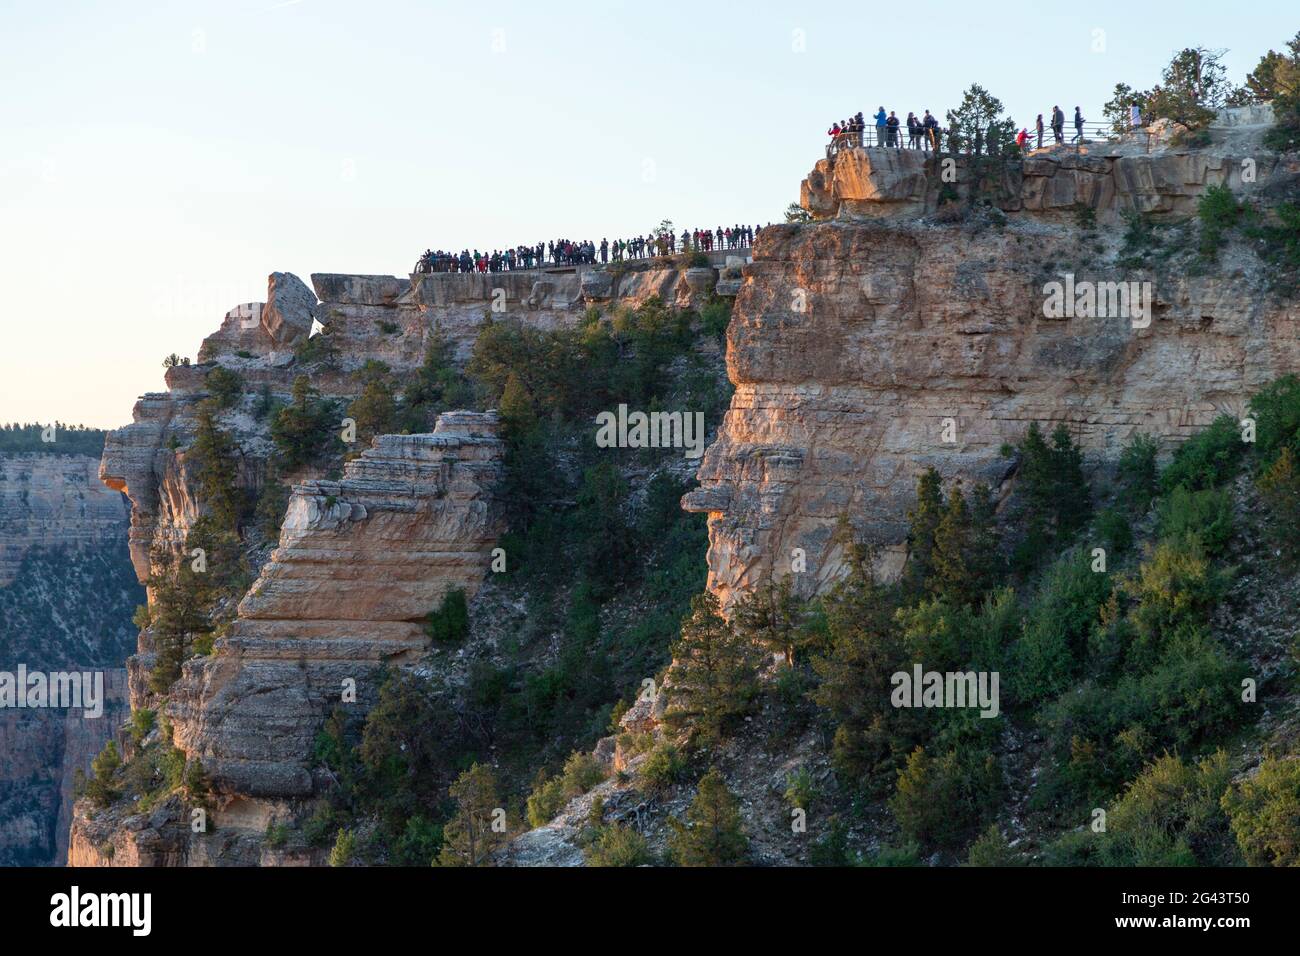 Visitors to the Grand Canyon National Park at the South Rim. Stock Photo